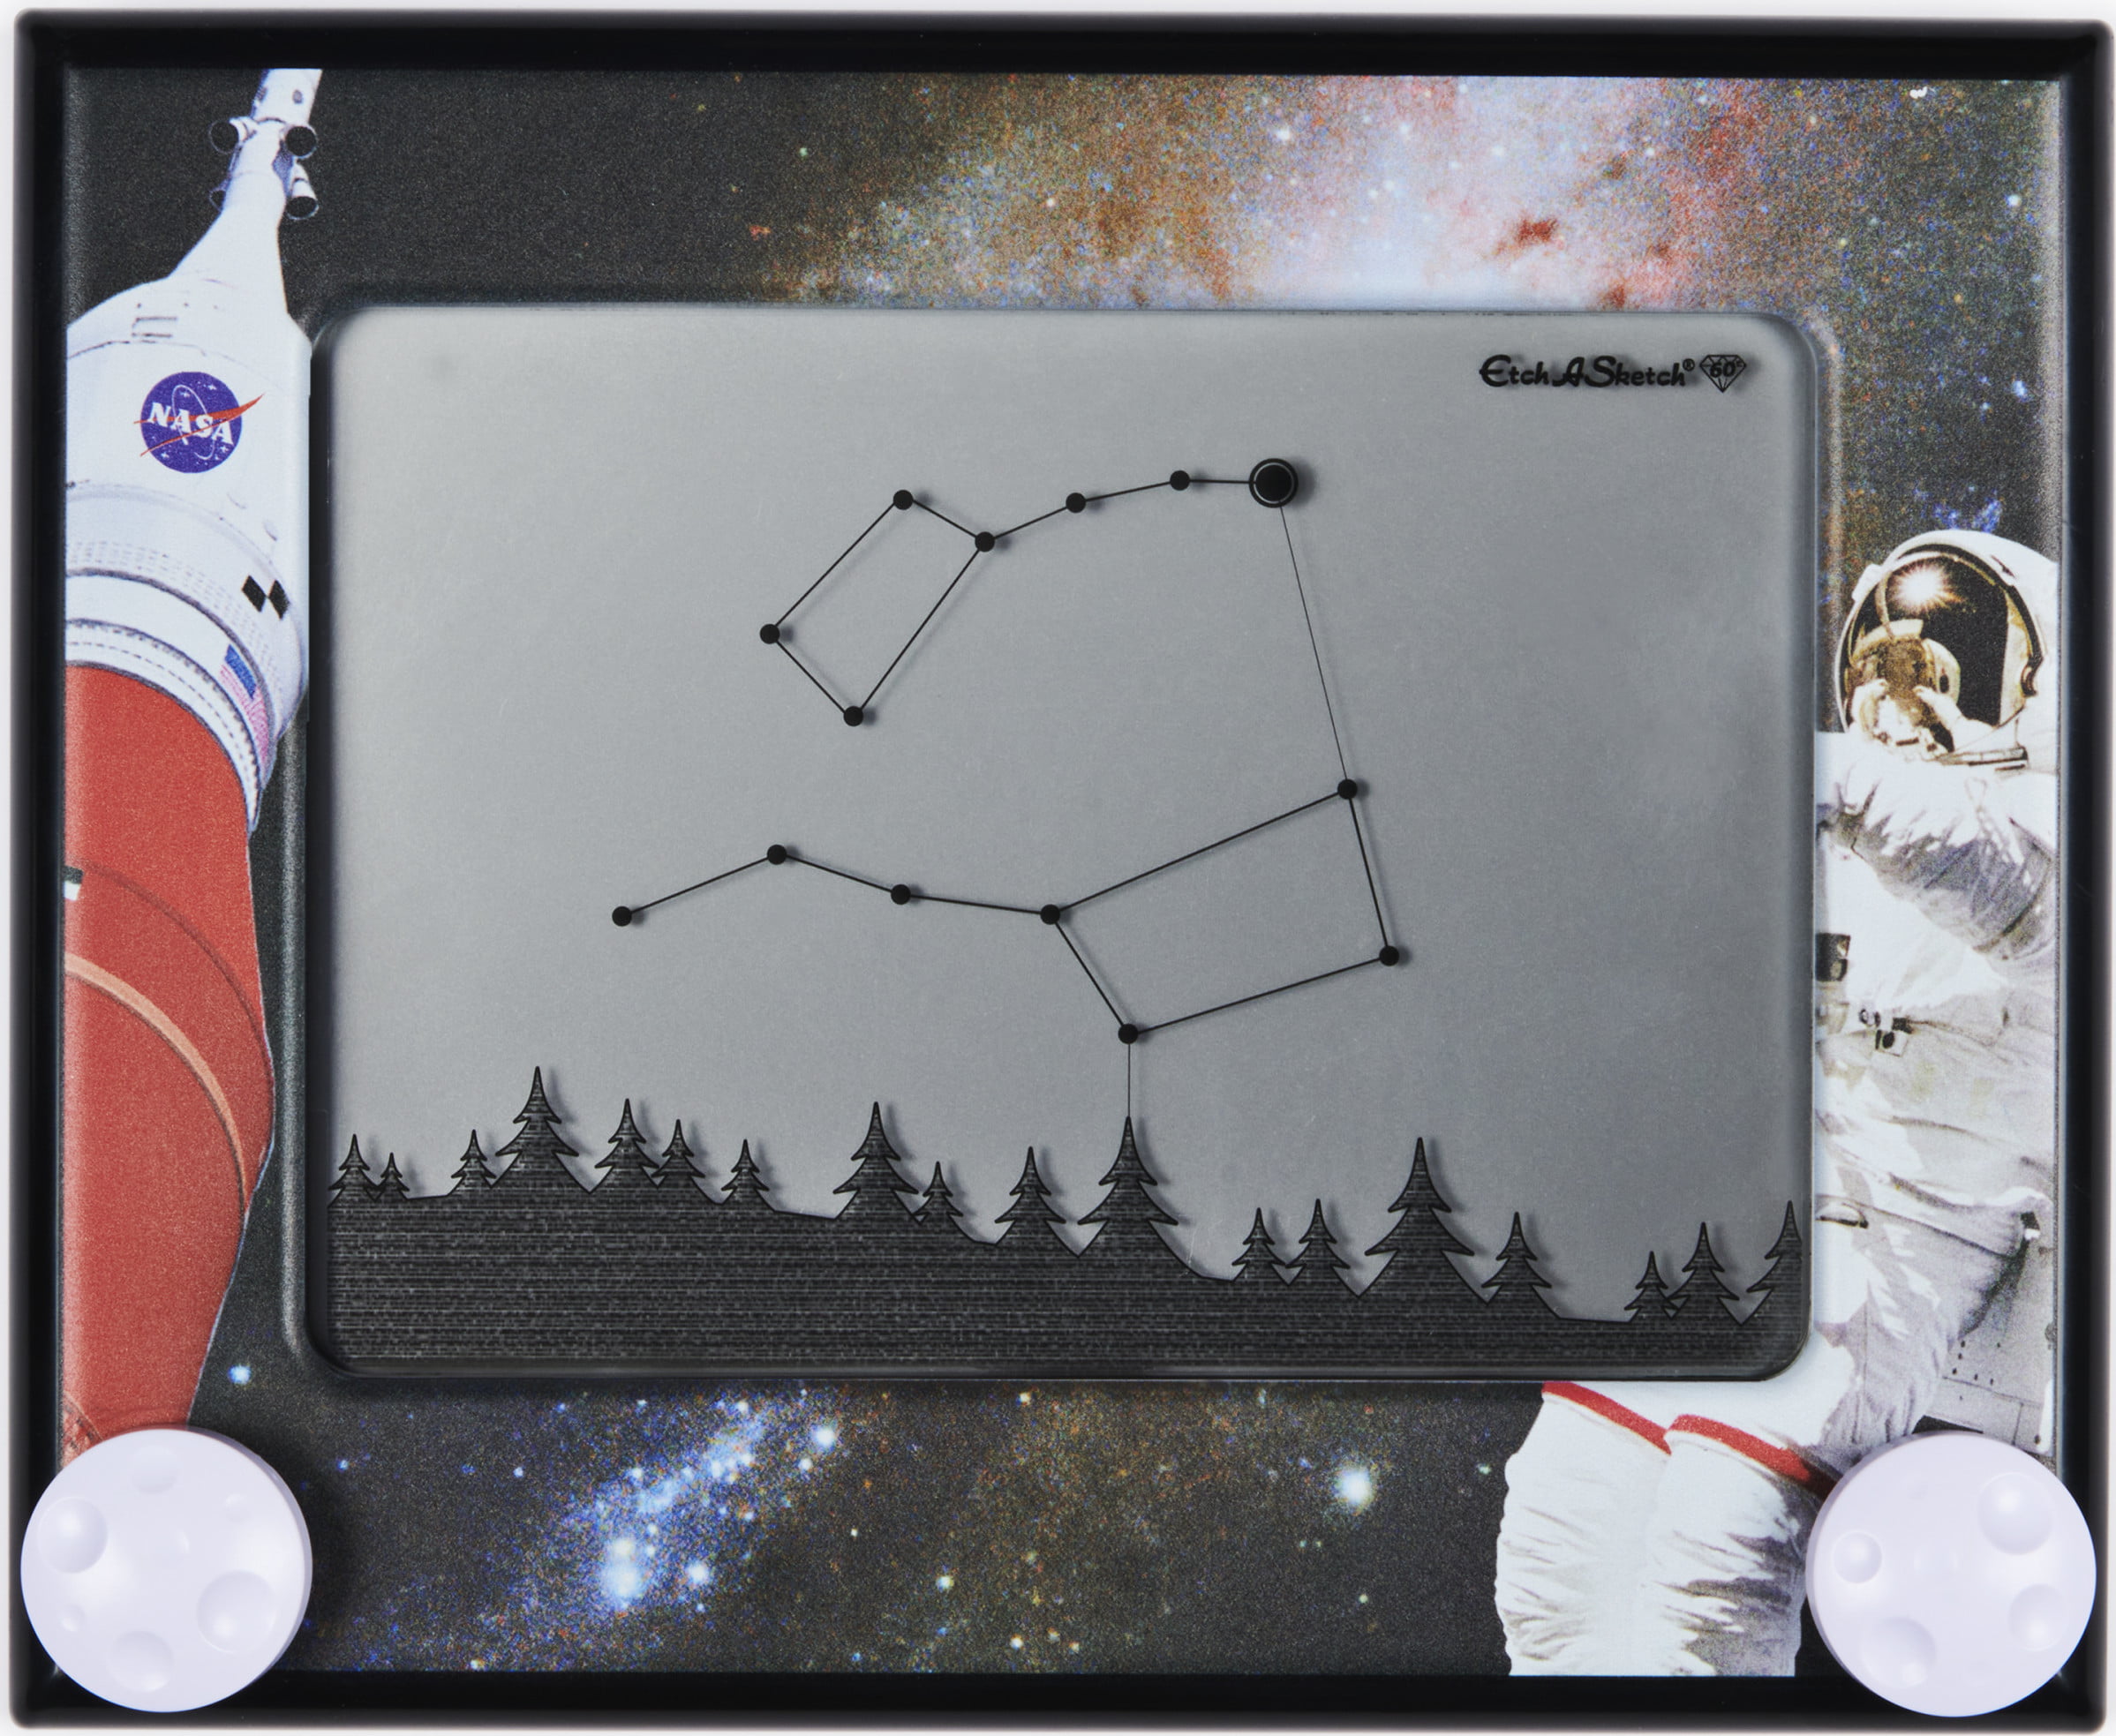 Etch A Sketch Classic NASA Inspired Limited-Edition Drawing Toy with Magic Screen for Ages 3 and Up 